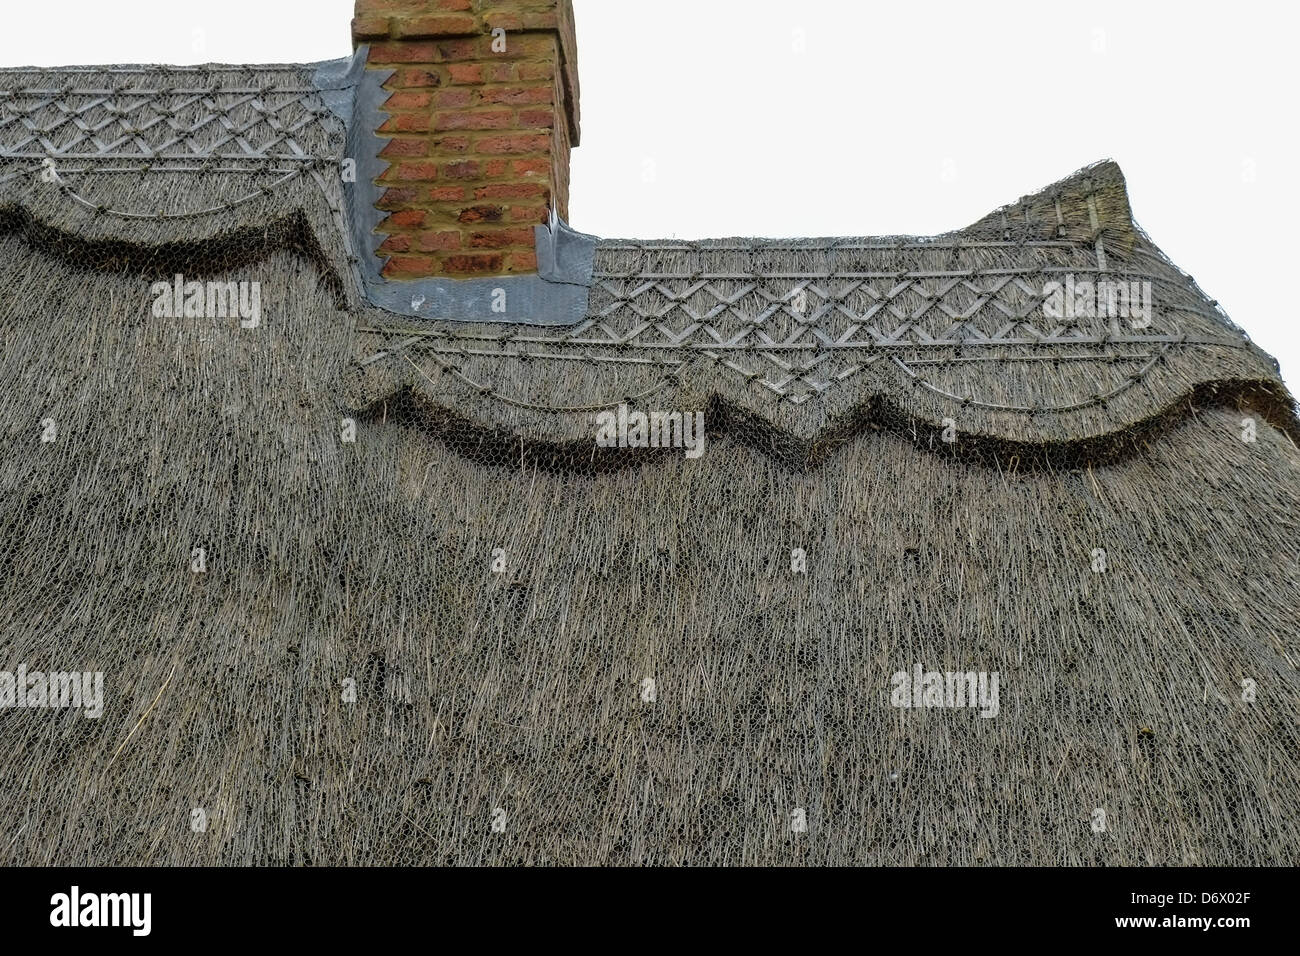 Detail of a traditional thatched roof. Stock Photo